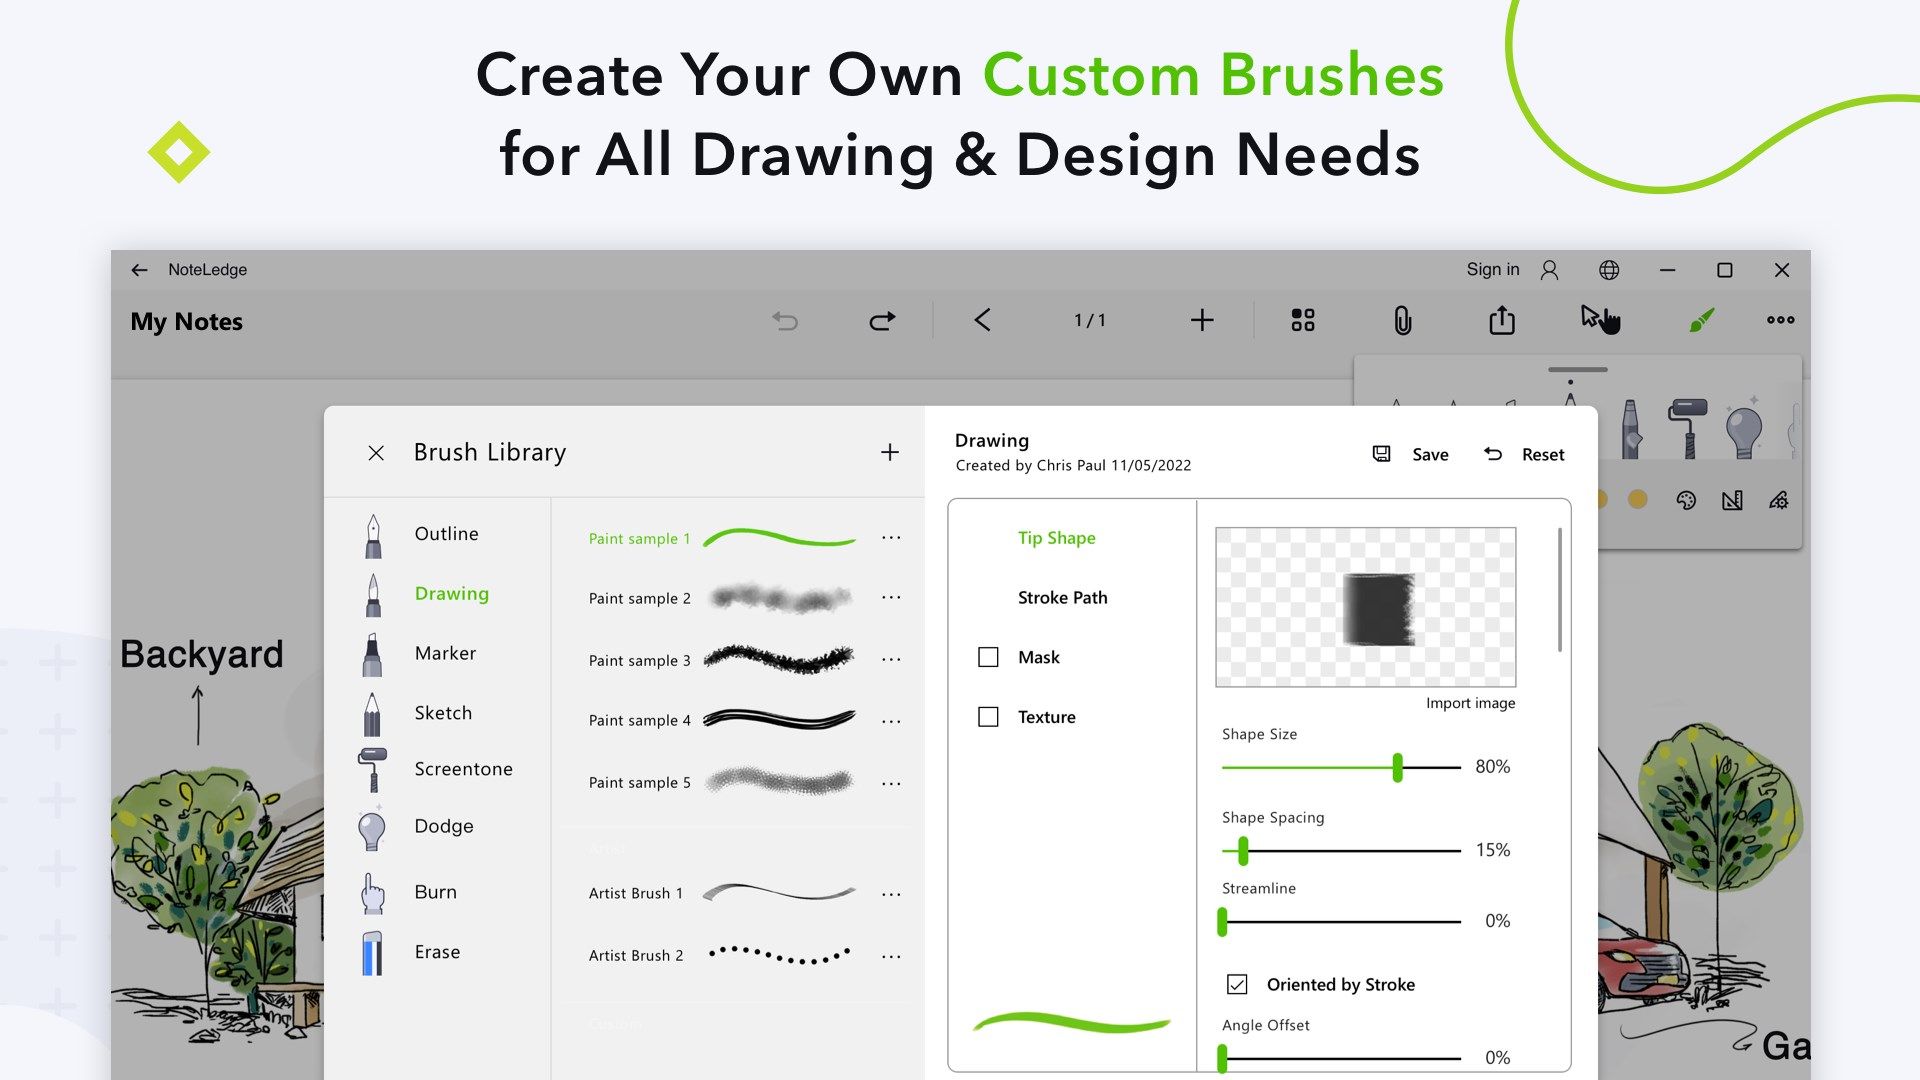 Create Your Own Custom Brushes for All Drawing & Design Needs